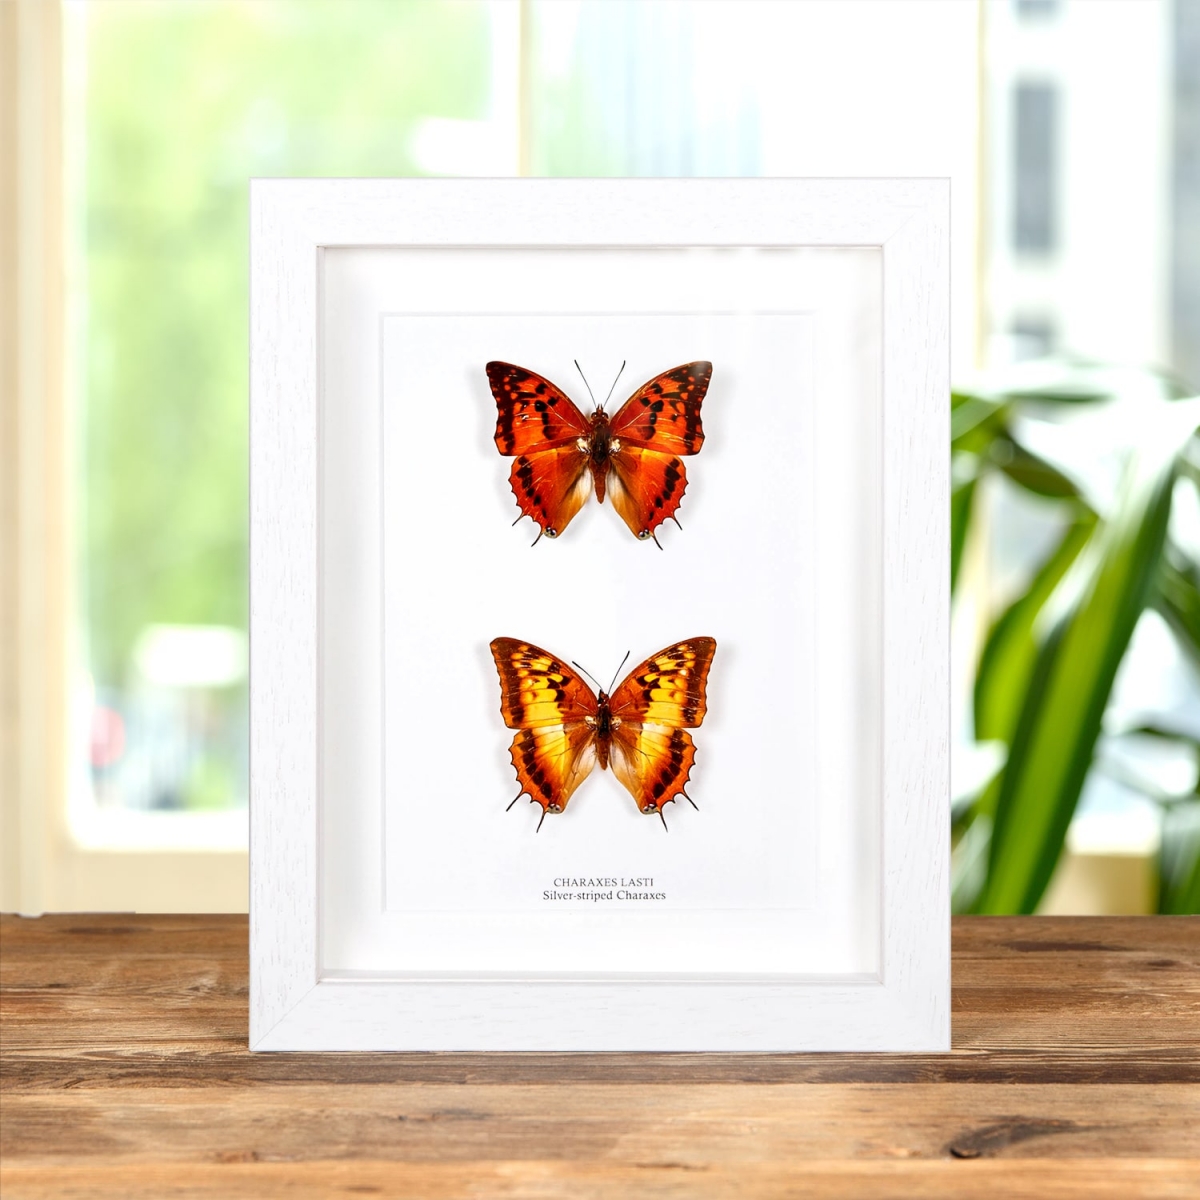 Silver-striped Charaxes Butterfly Male & Female In Box Frame (Charaxes lasti)